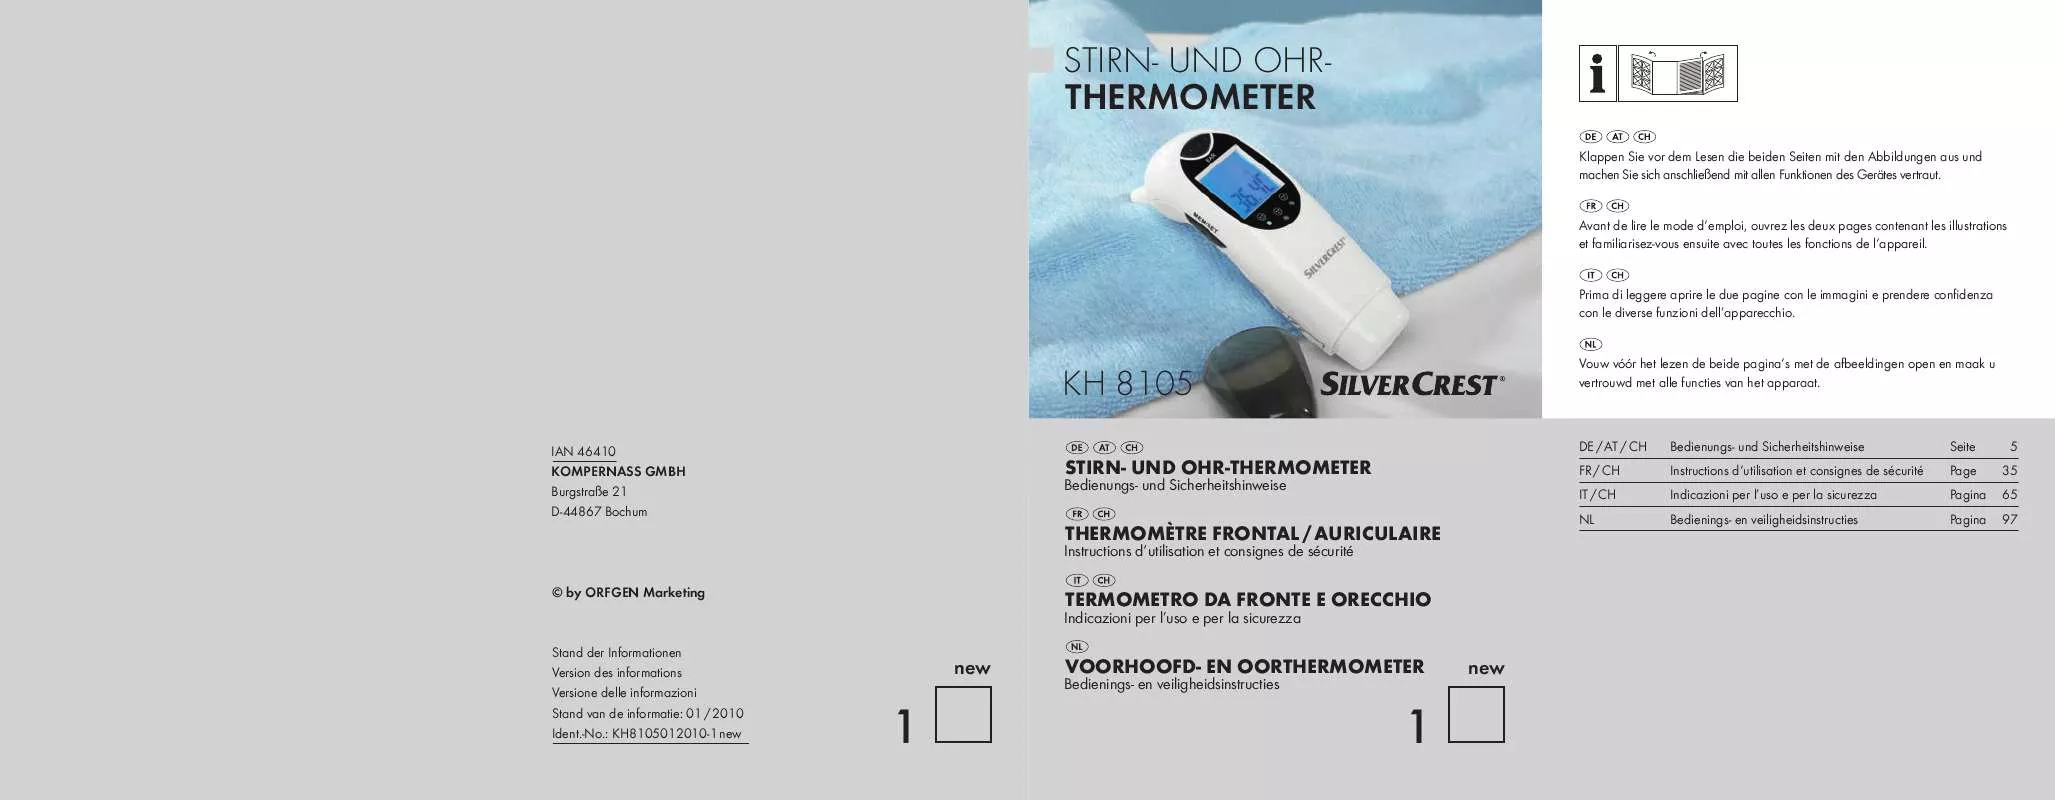 Mode d'emploi SILVERCREST KH 8105 FOREHEAD AND EAR THERMOMETER